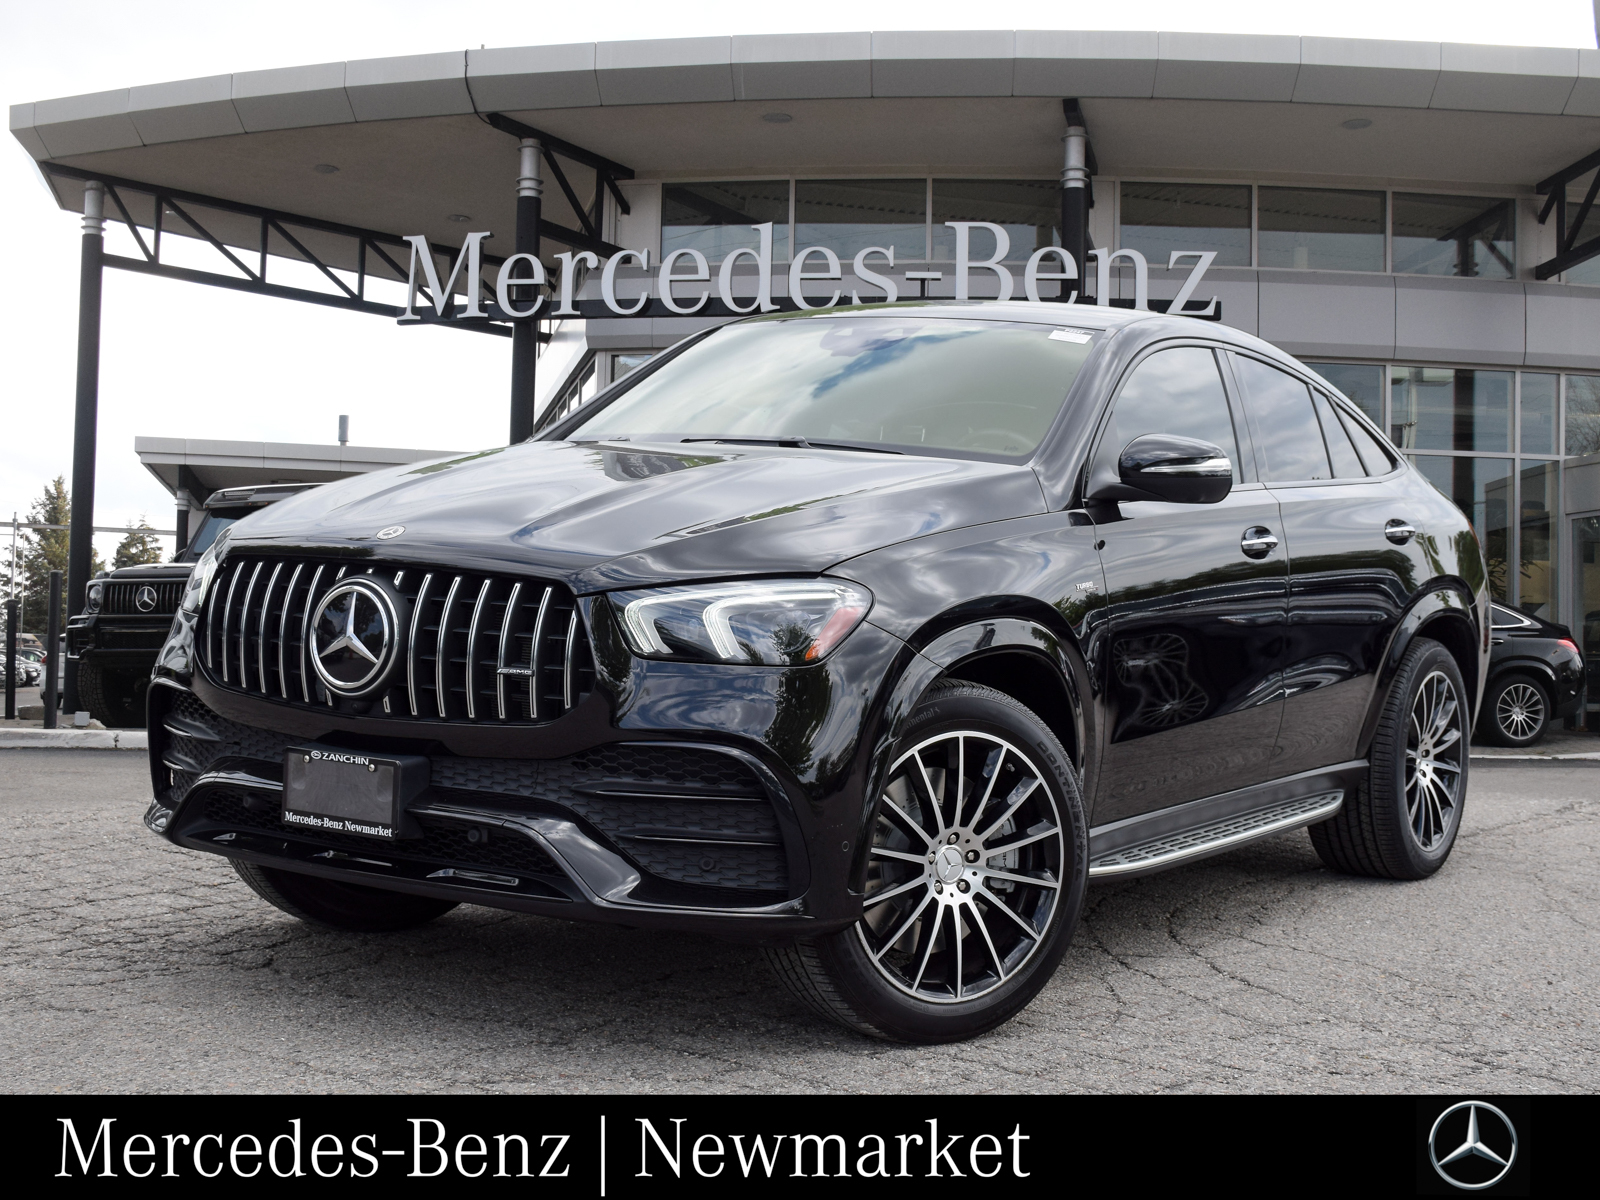 2021 Mercedes-Benz GLE 4MATIC+ Coupe - AMG Night - Carbon Trim - AMG Rims